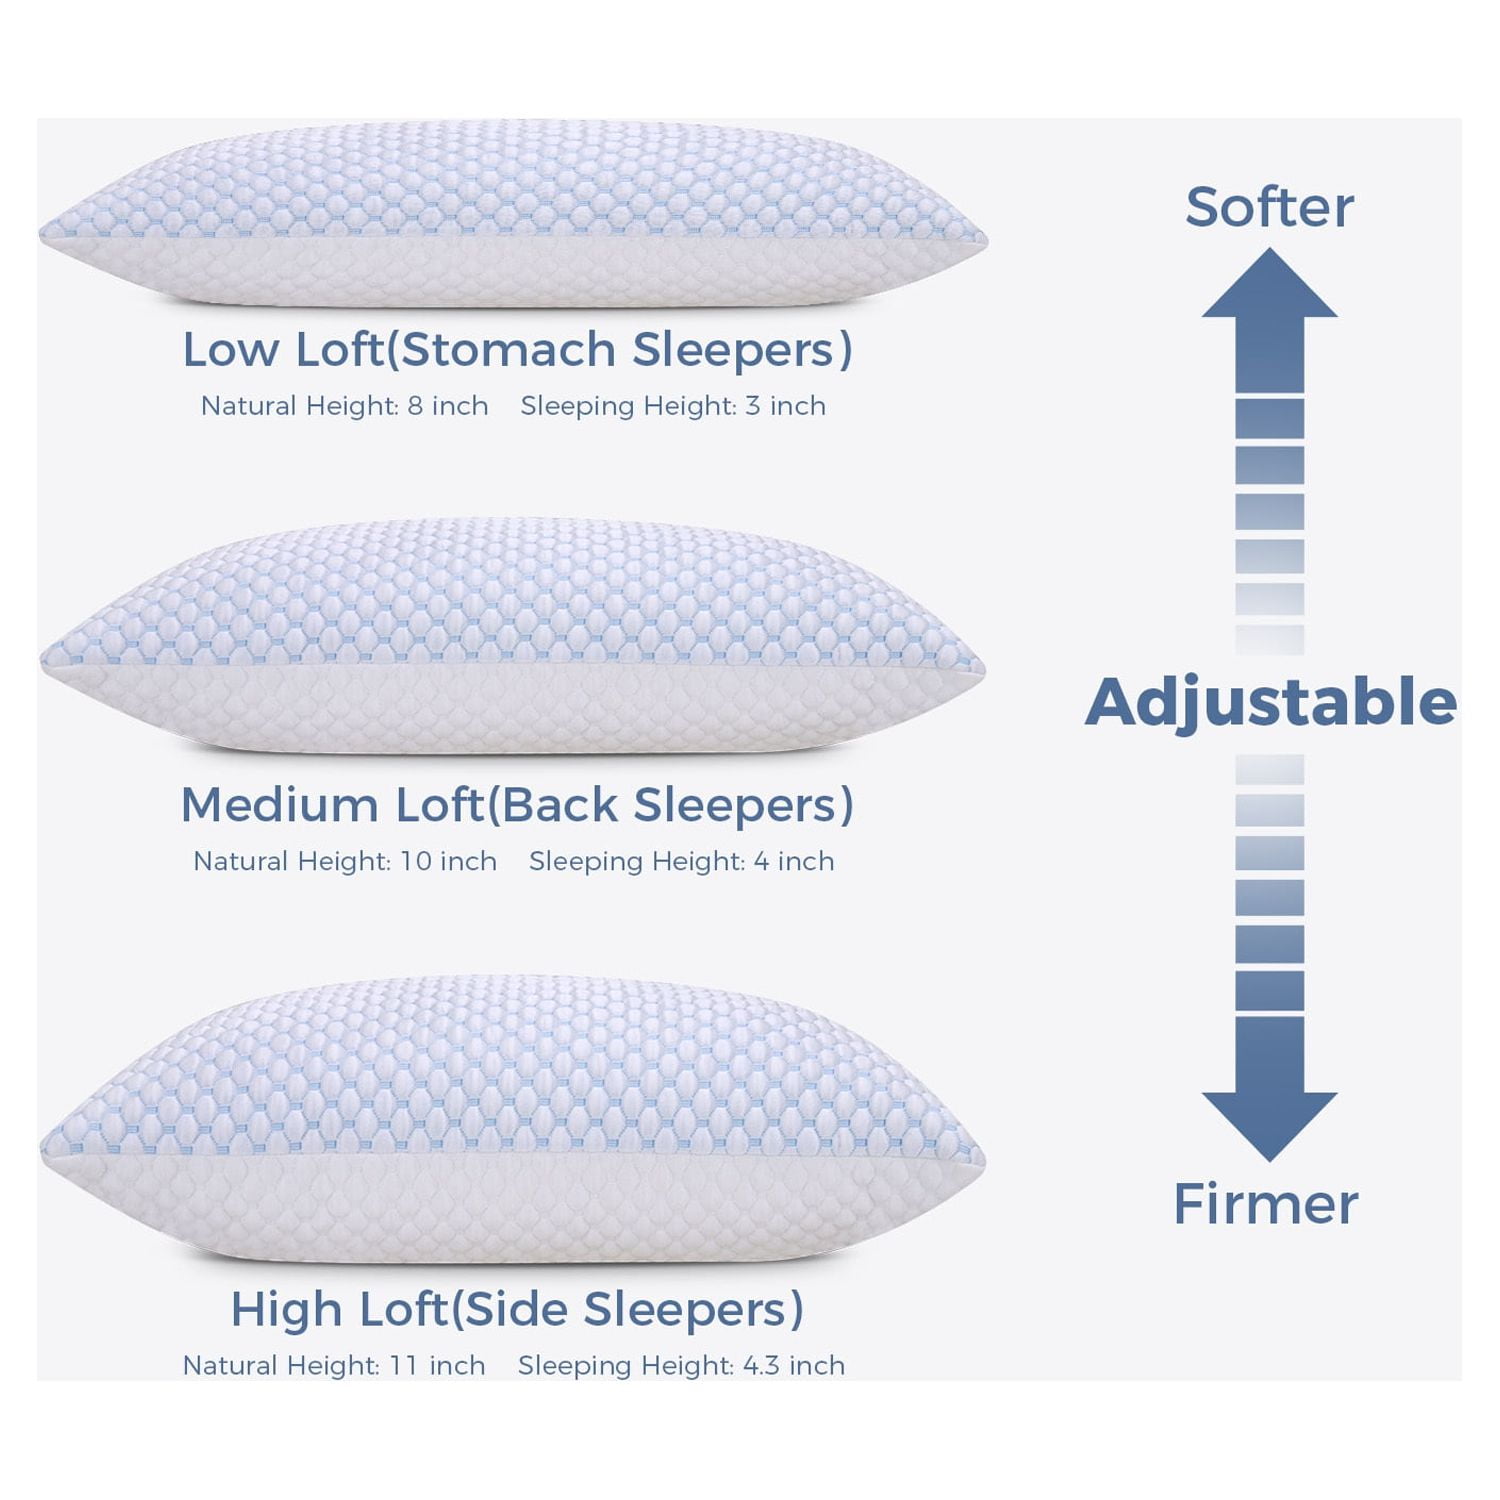  Sleep Restoration Bed Pillows for Sleeping – Queen Size Set of  2, Comfortable Luxury Cooling Pillow for Back Side or Stomach Sleepers :  Home & Kitchen